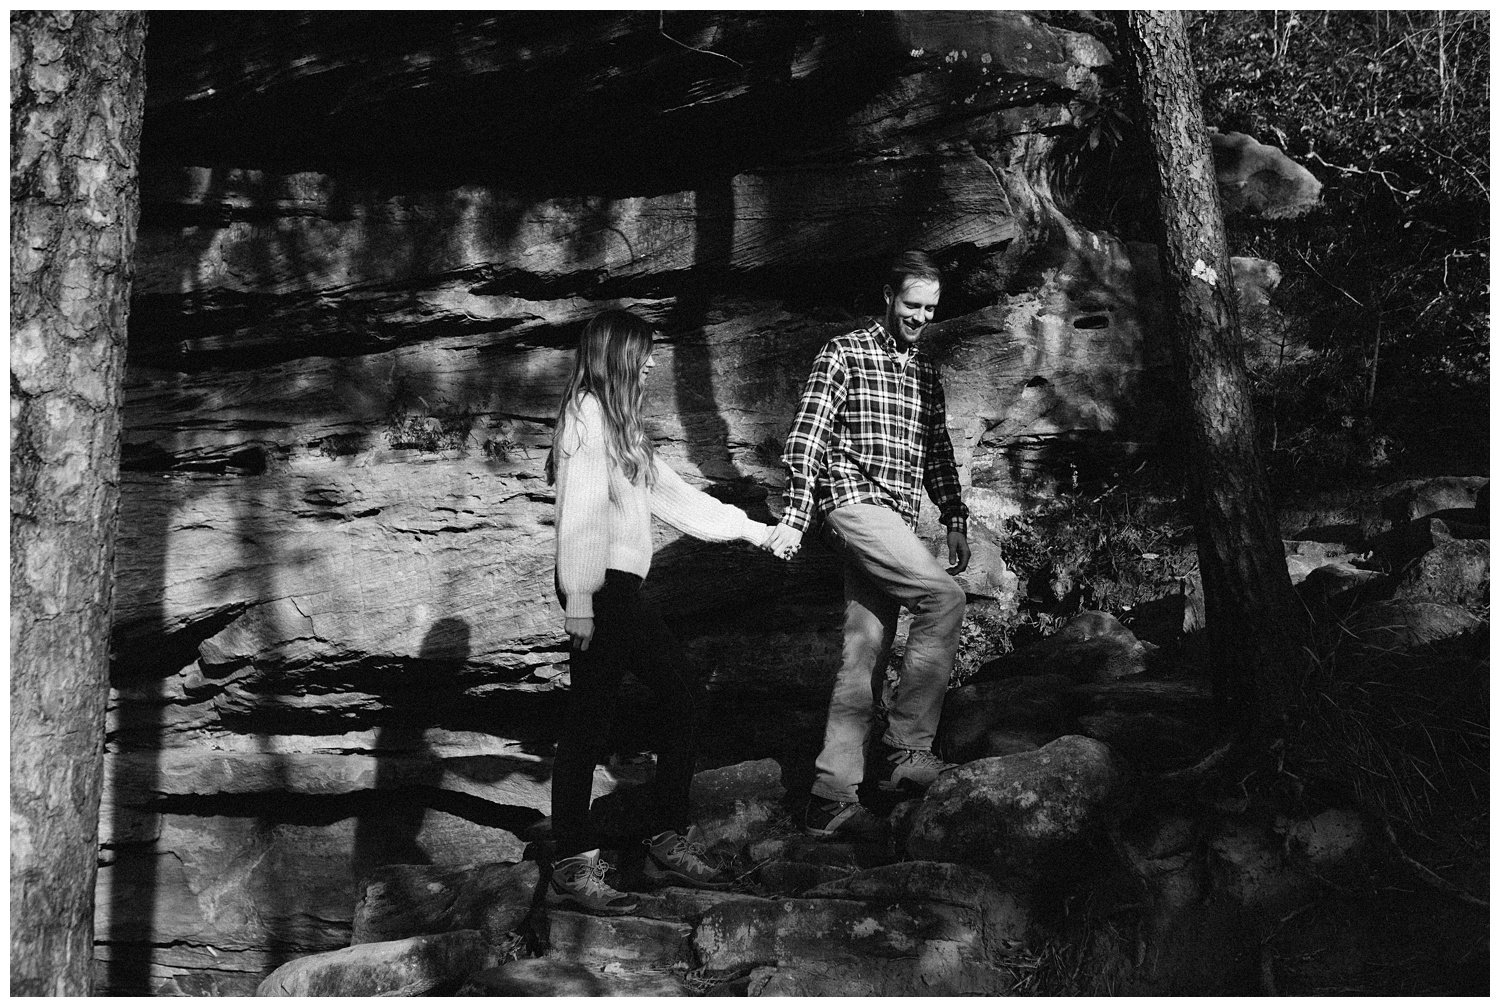 kendra_Farris_photography_red_river_gorge_photographer_proposal_engagement_elopement-50.jpg